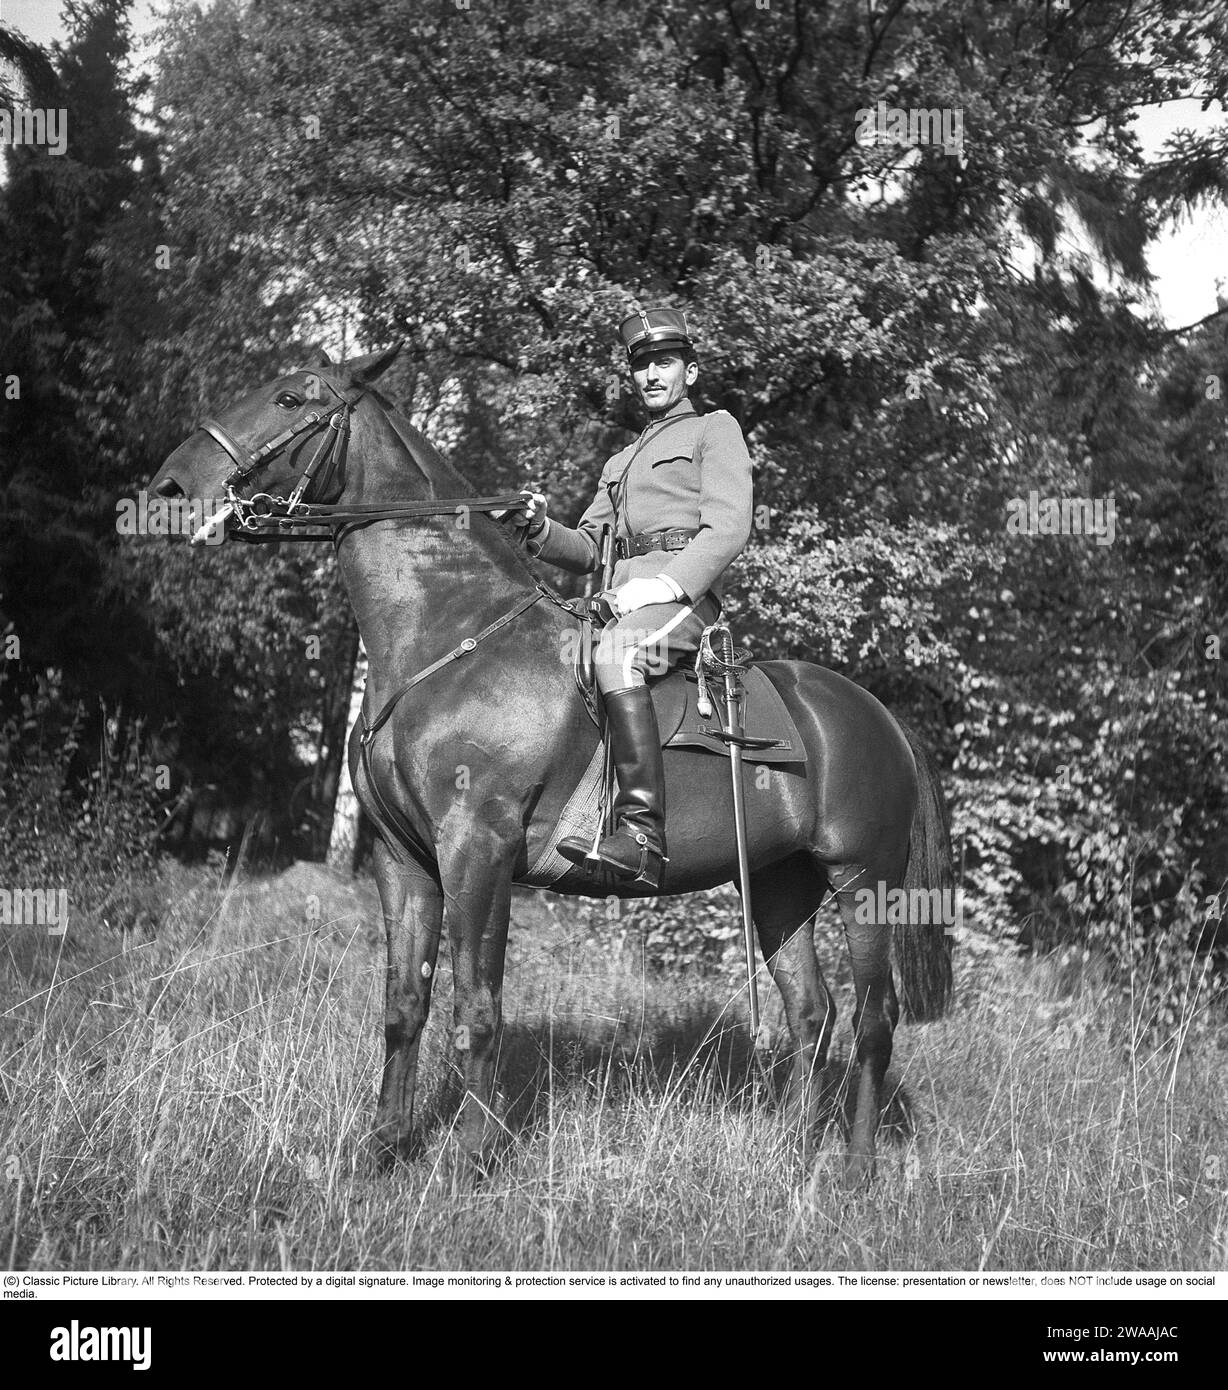 Swedish officer in the cavalry. At the time when the picture was taken, the Second World War was going on. Sweden mobilized soldiers and increased preparedness. On April 7, 1940, it was decided to start mobilizing the cavalry brigade. The main tasks of the cavalry are reconnaissance and rapid assault. In 1970 new acquisition of horses ceased.  Sweden in 1943. Kristoffersson ref F16-5 Stock Photo